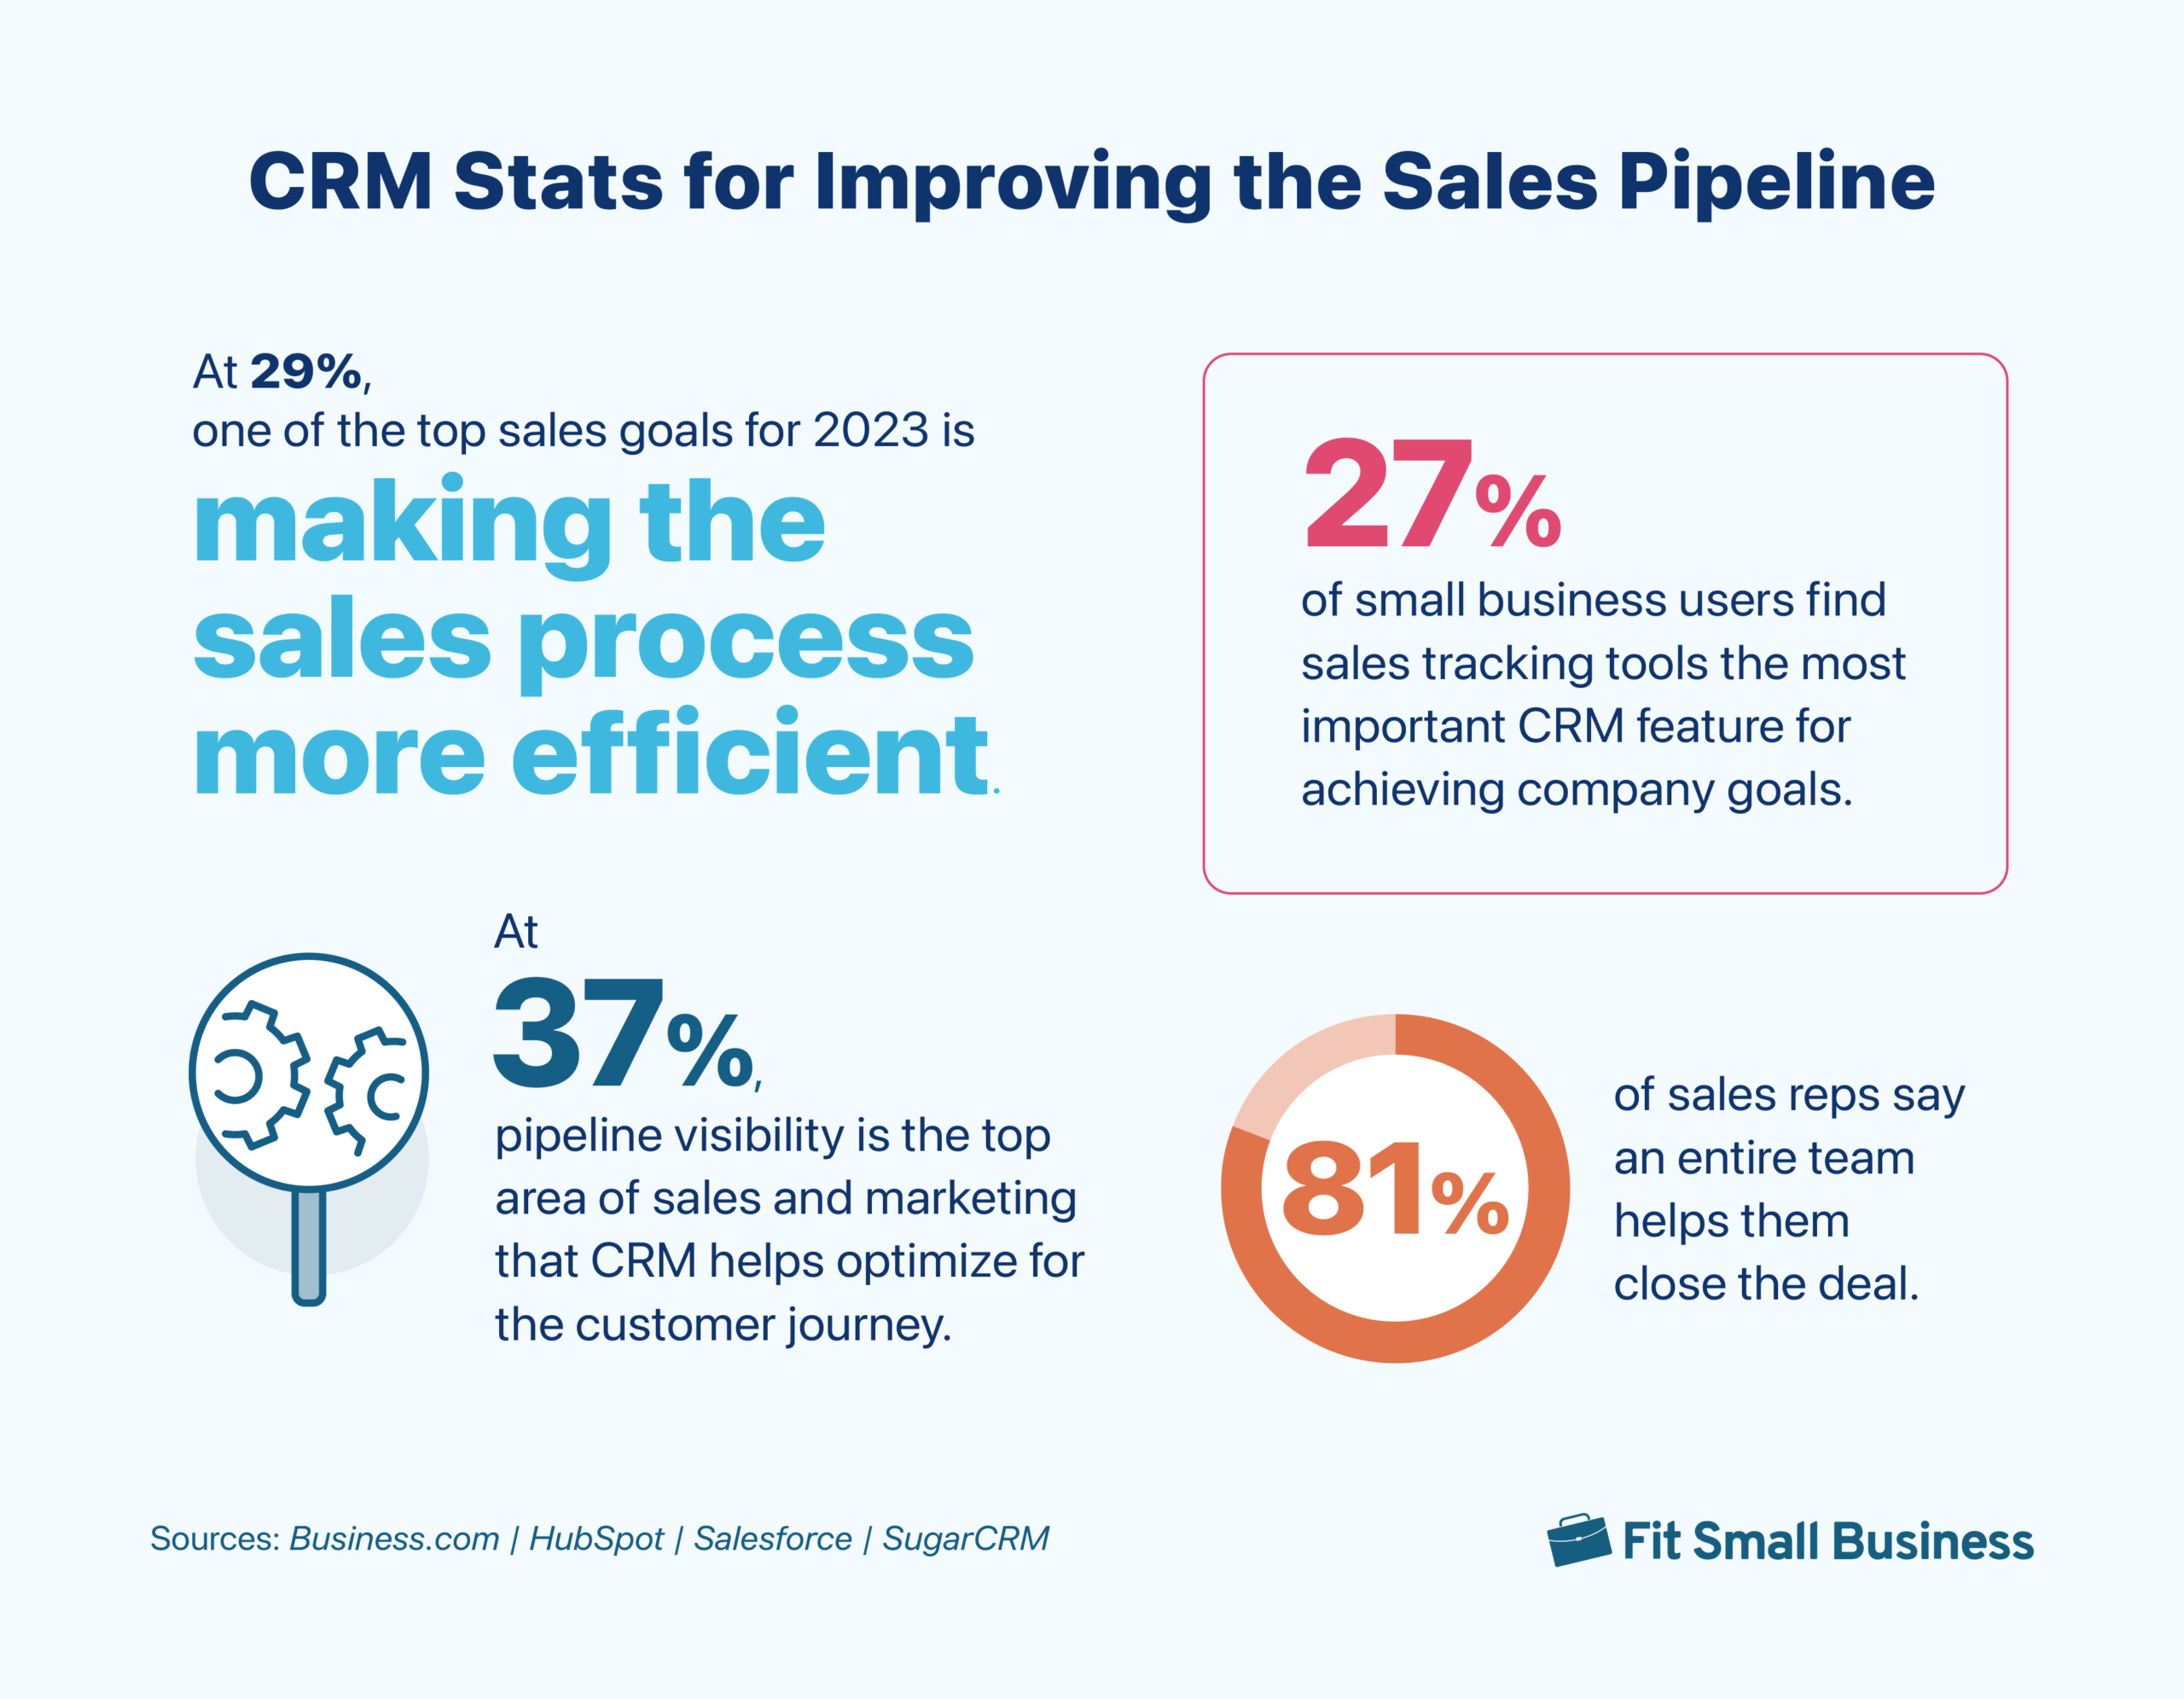 An infographic containing several CRM statistics for improving the sales pipeline.